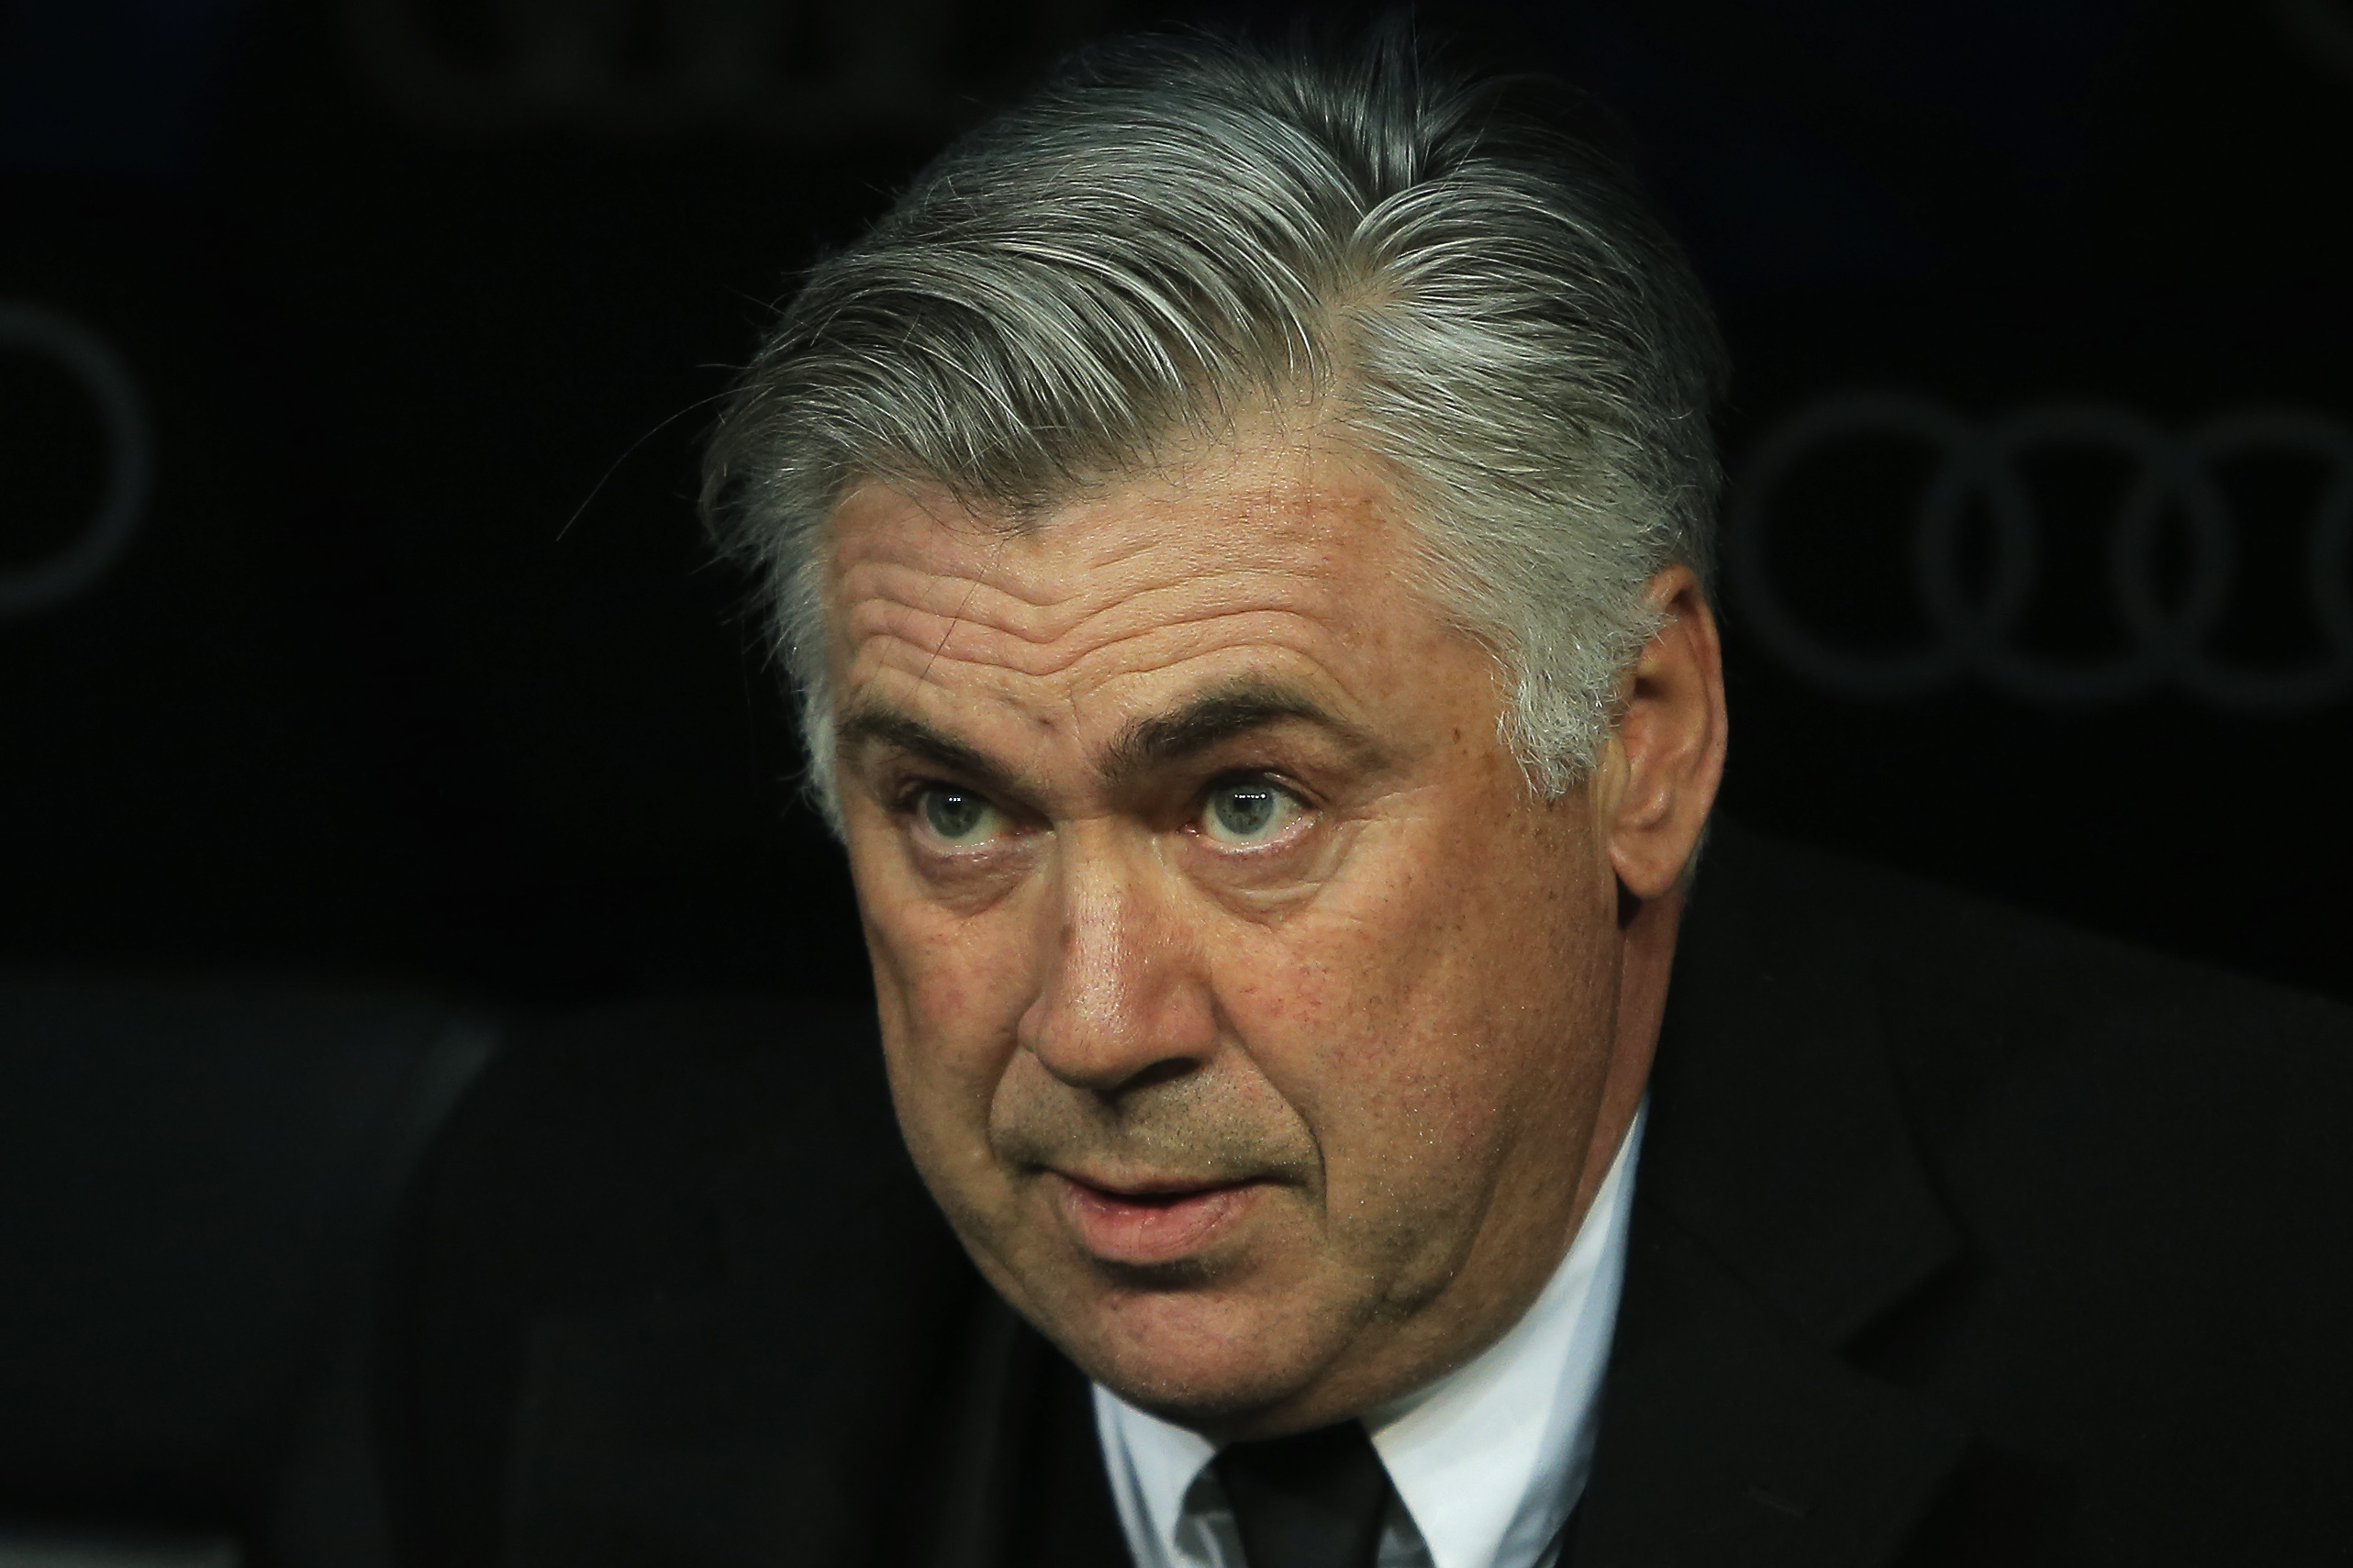 FILE - In this Jan. 6, 2014 file picture Real Madrid's coach Carlo Ancelotti looks on during a Spanish La Liga soccer match between Real Madrid and Celta at the Santiago Bernabeu stadium in Madrid, Spain. Photo: AP